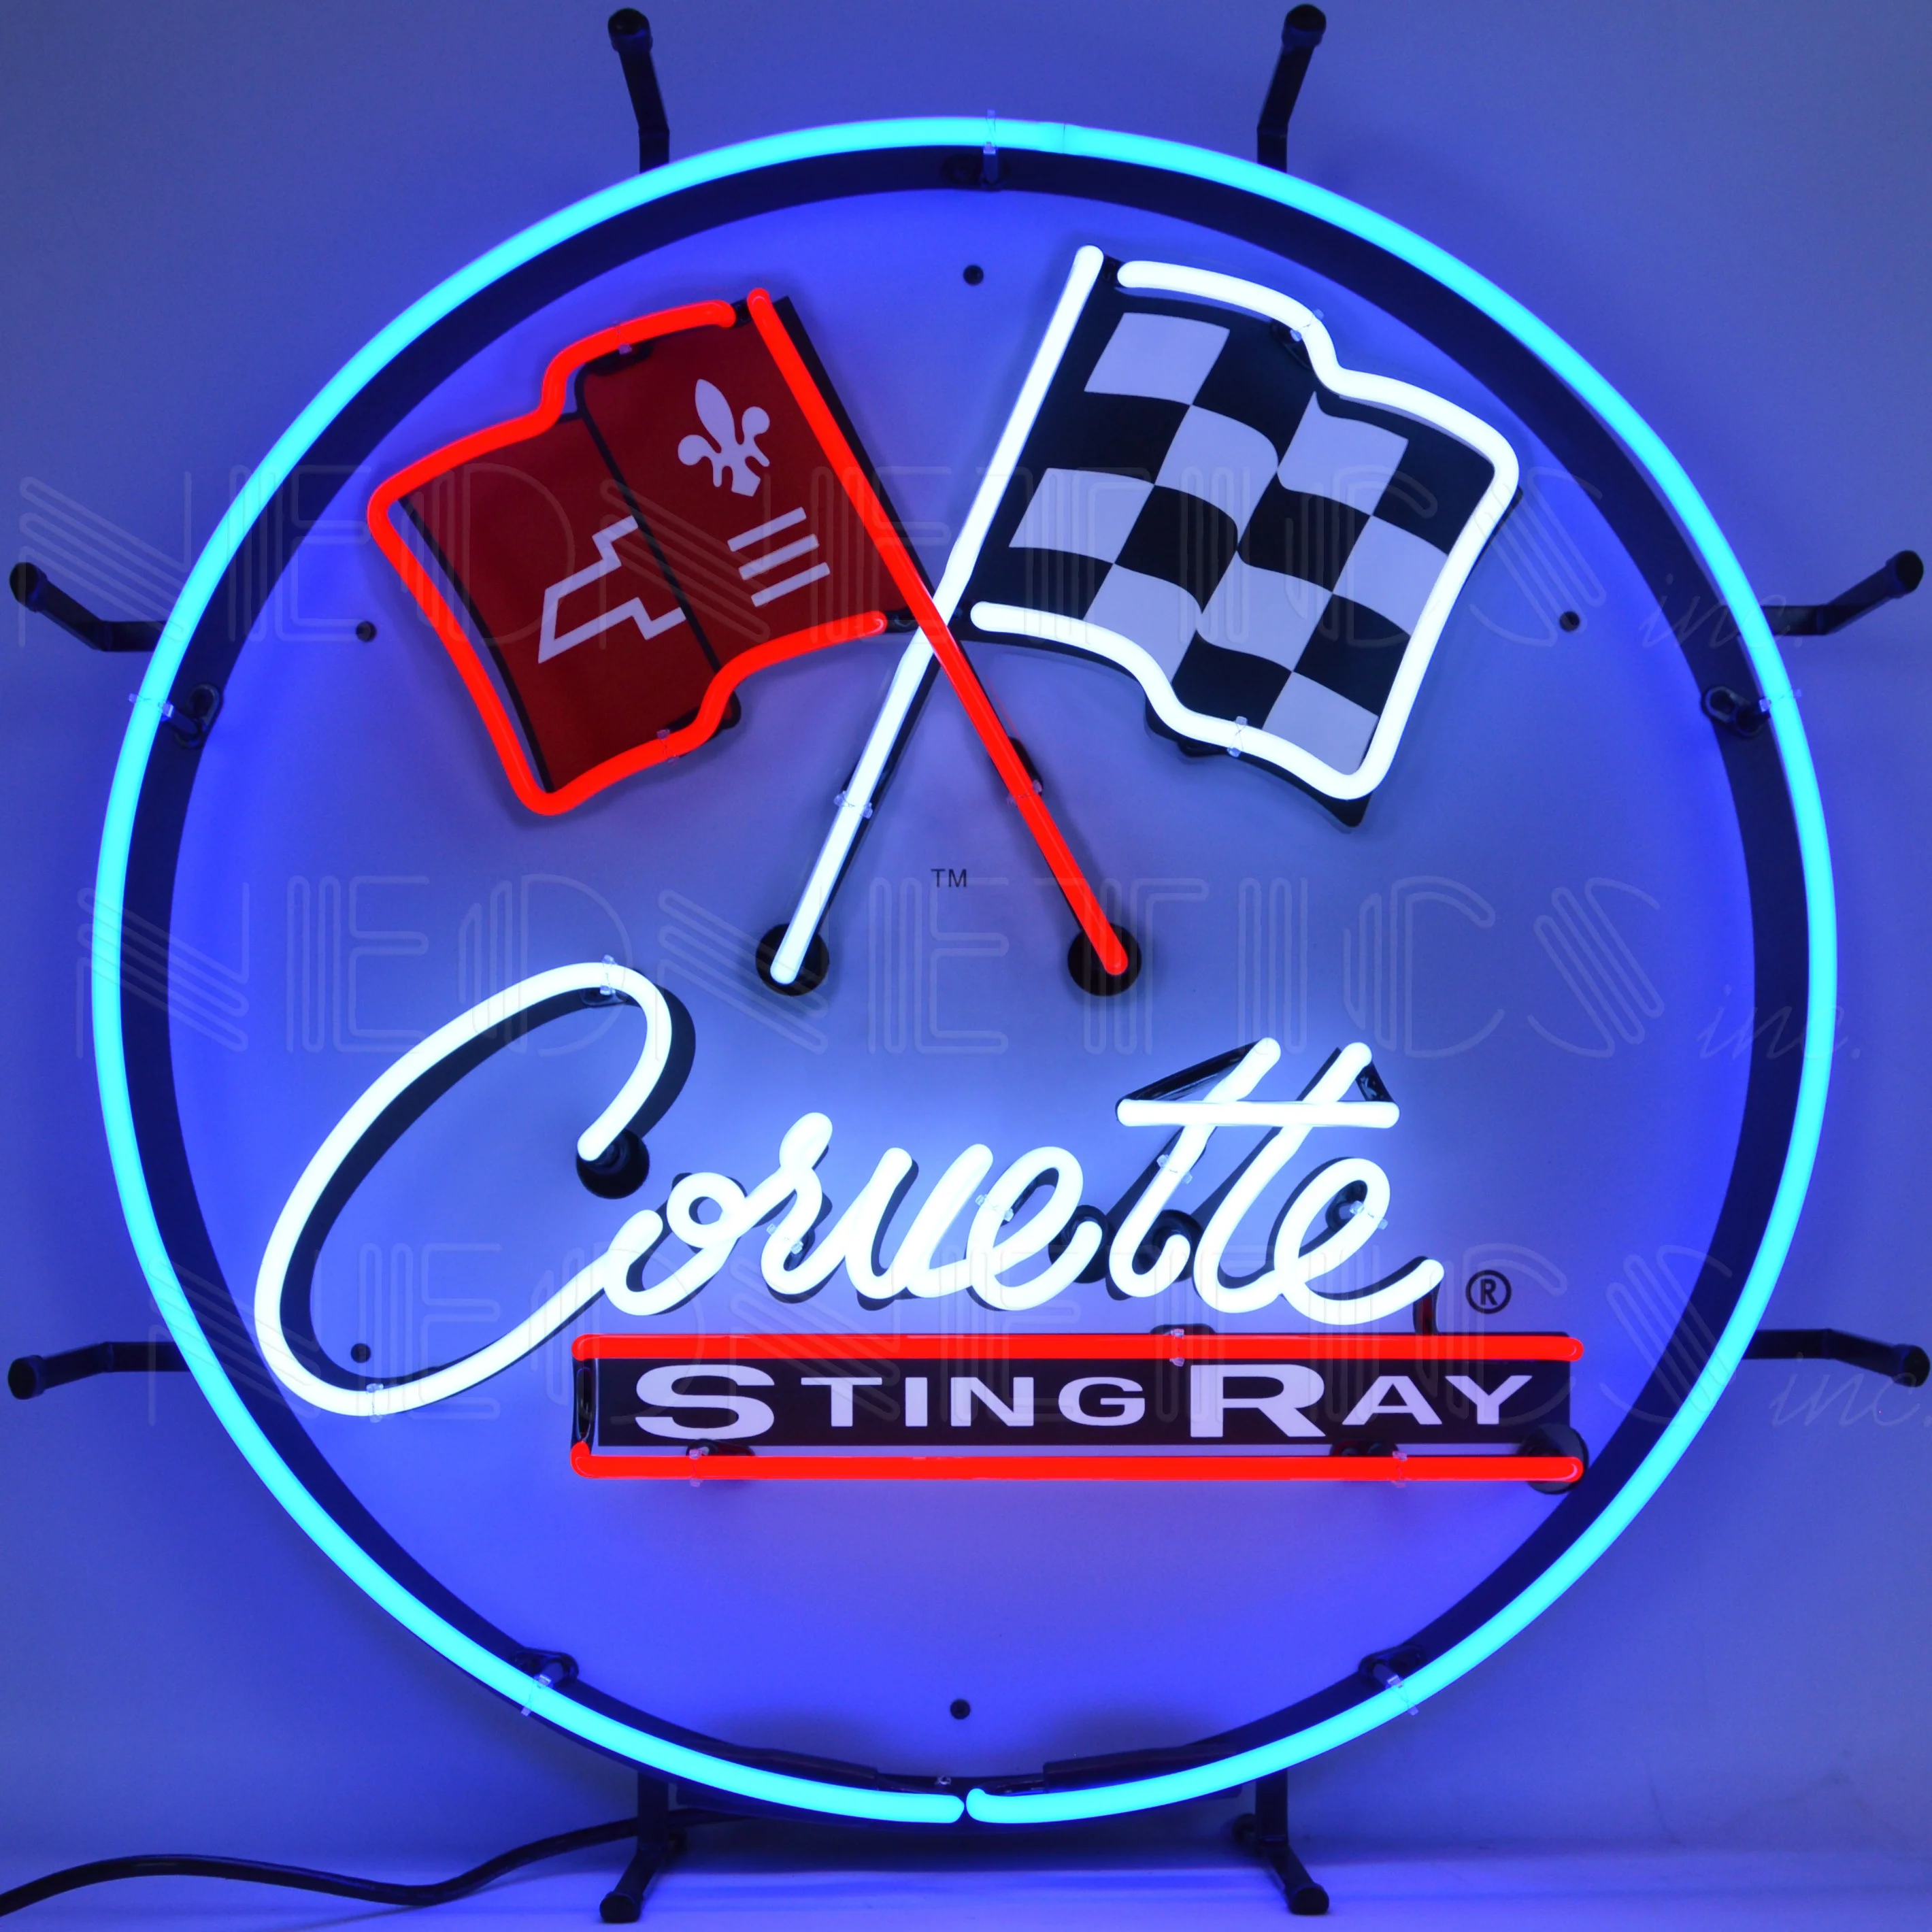 Neon sign Corvette glass neon sign sculpture wall neon clock china factory shanghai antuo